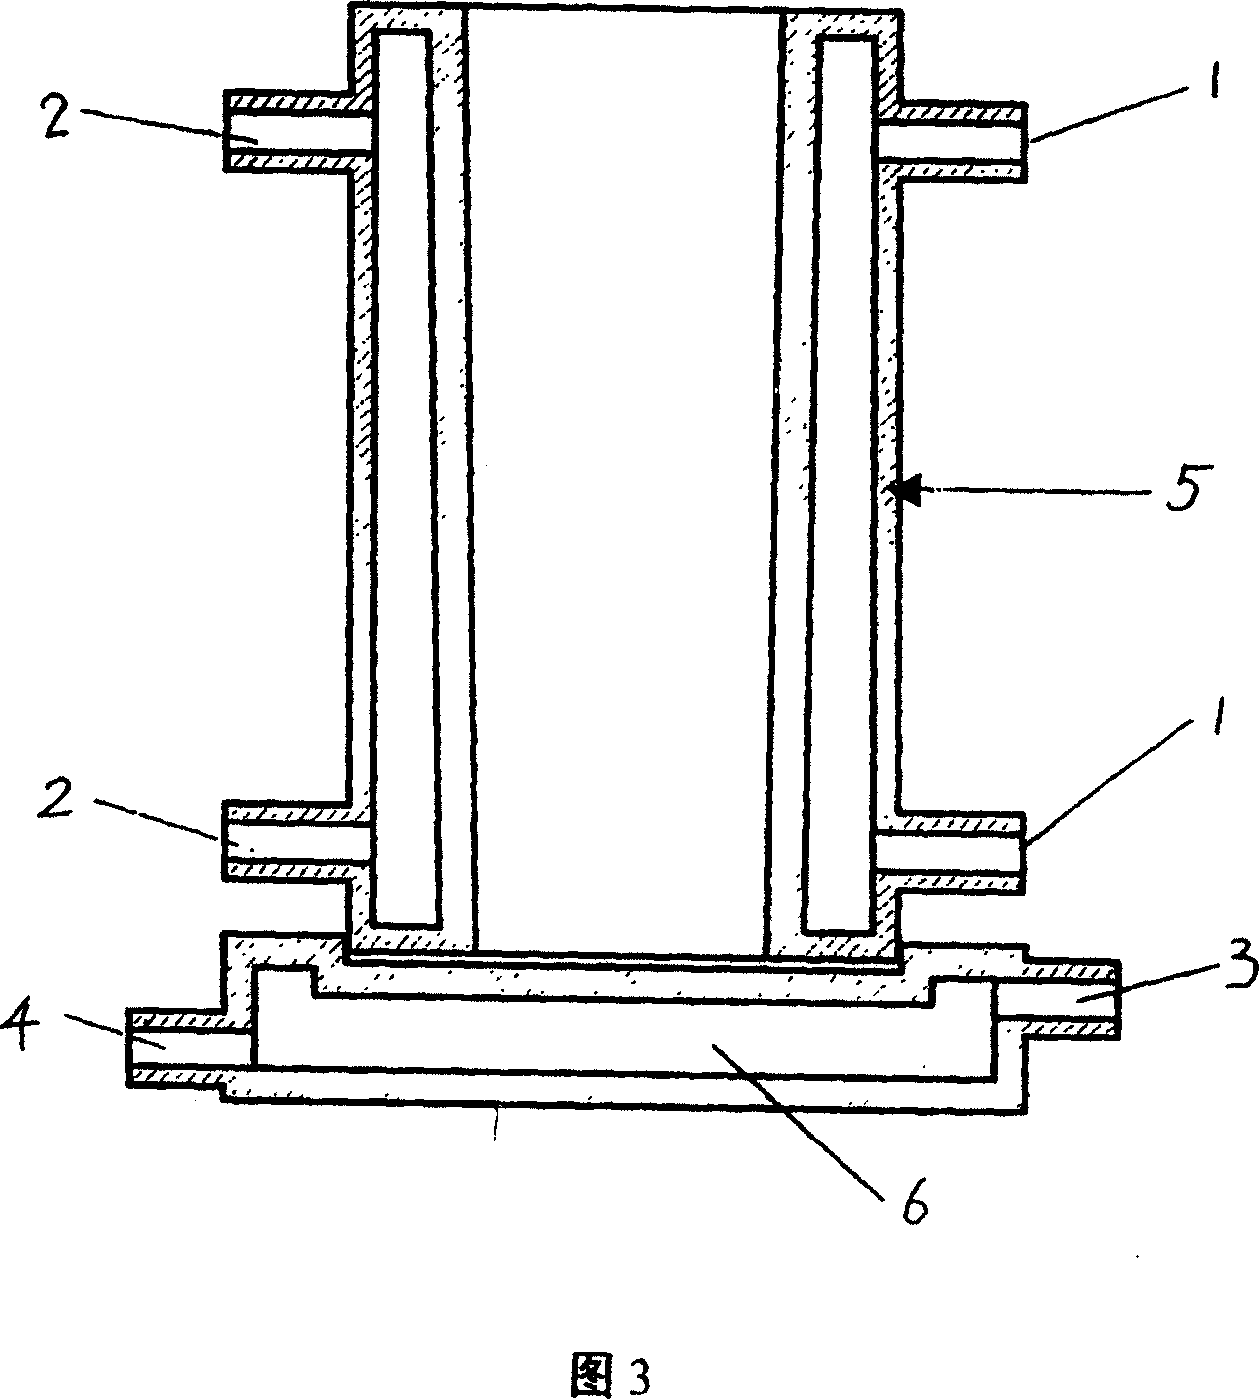 Ti-containing Sn-based alloy and its smelting preparation method